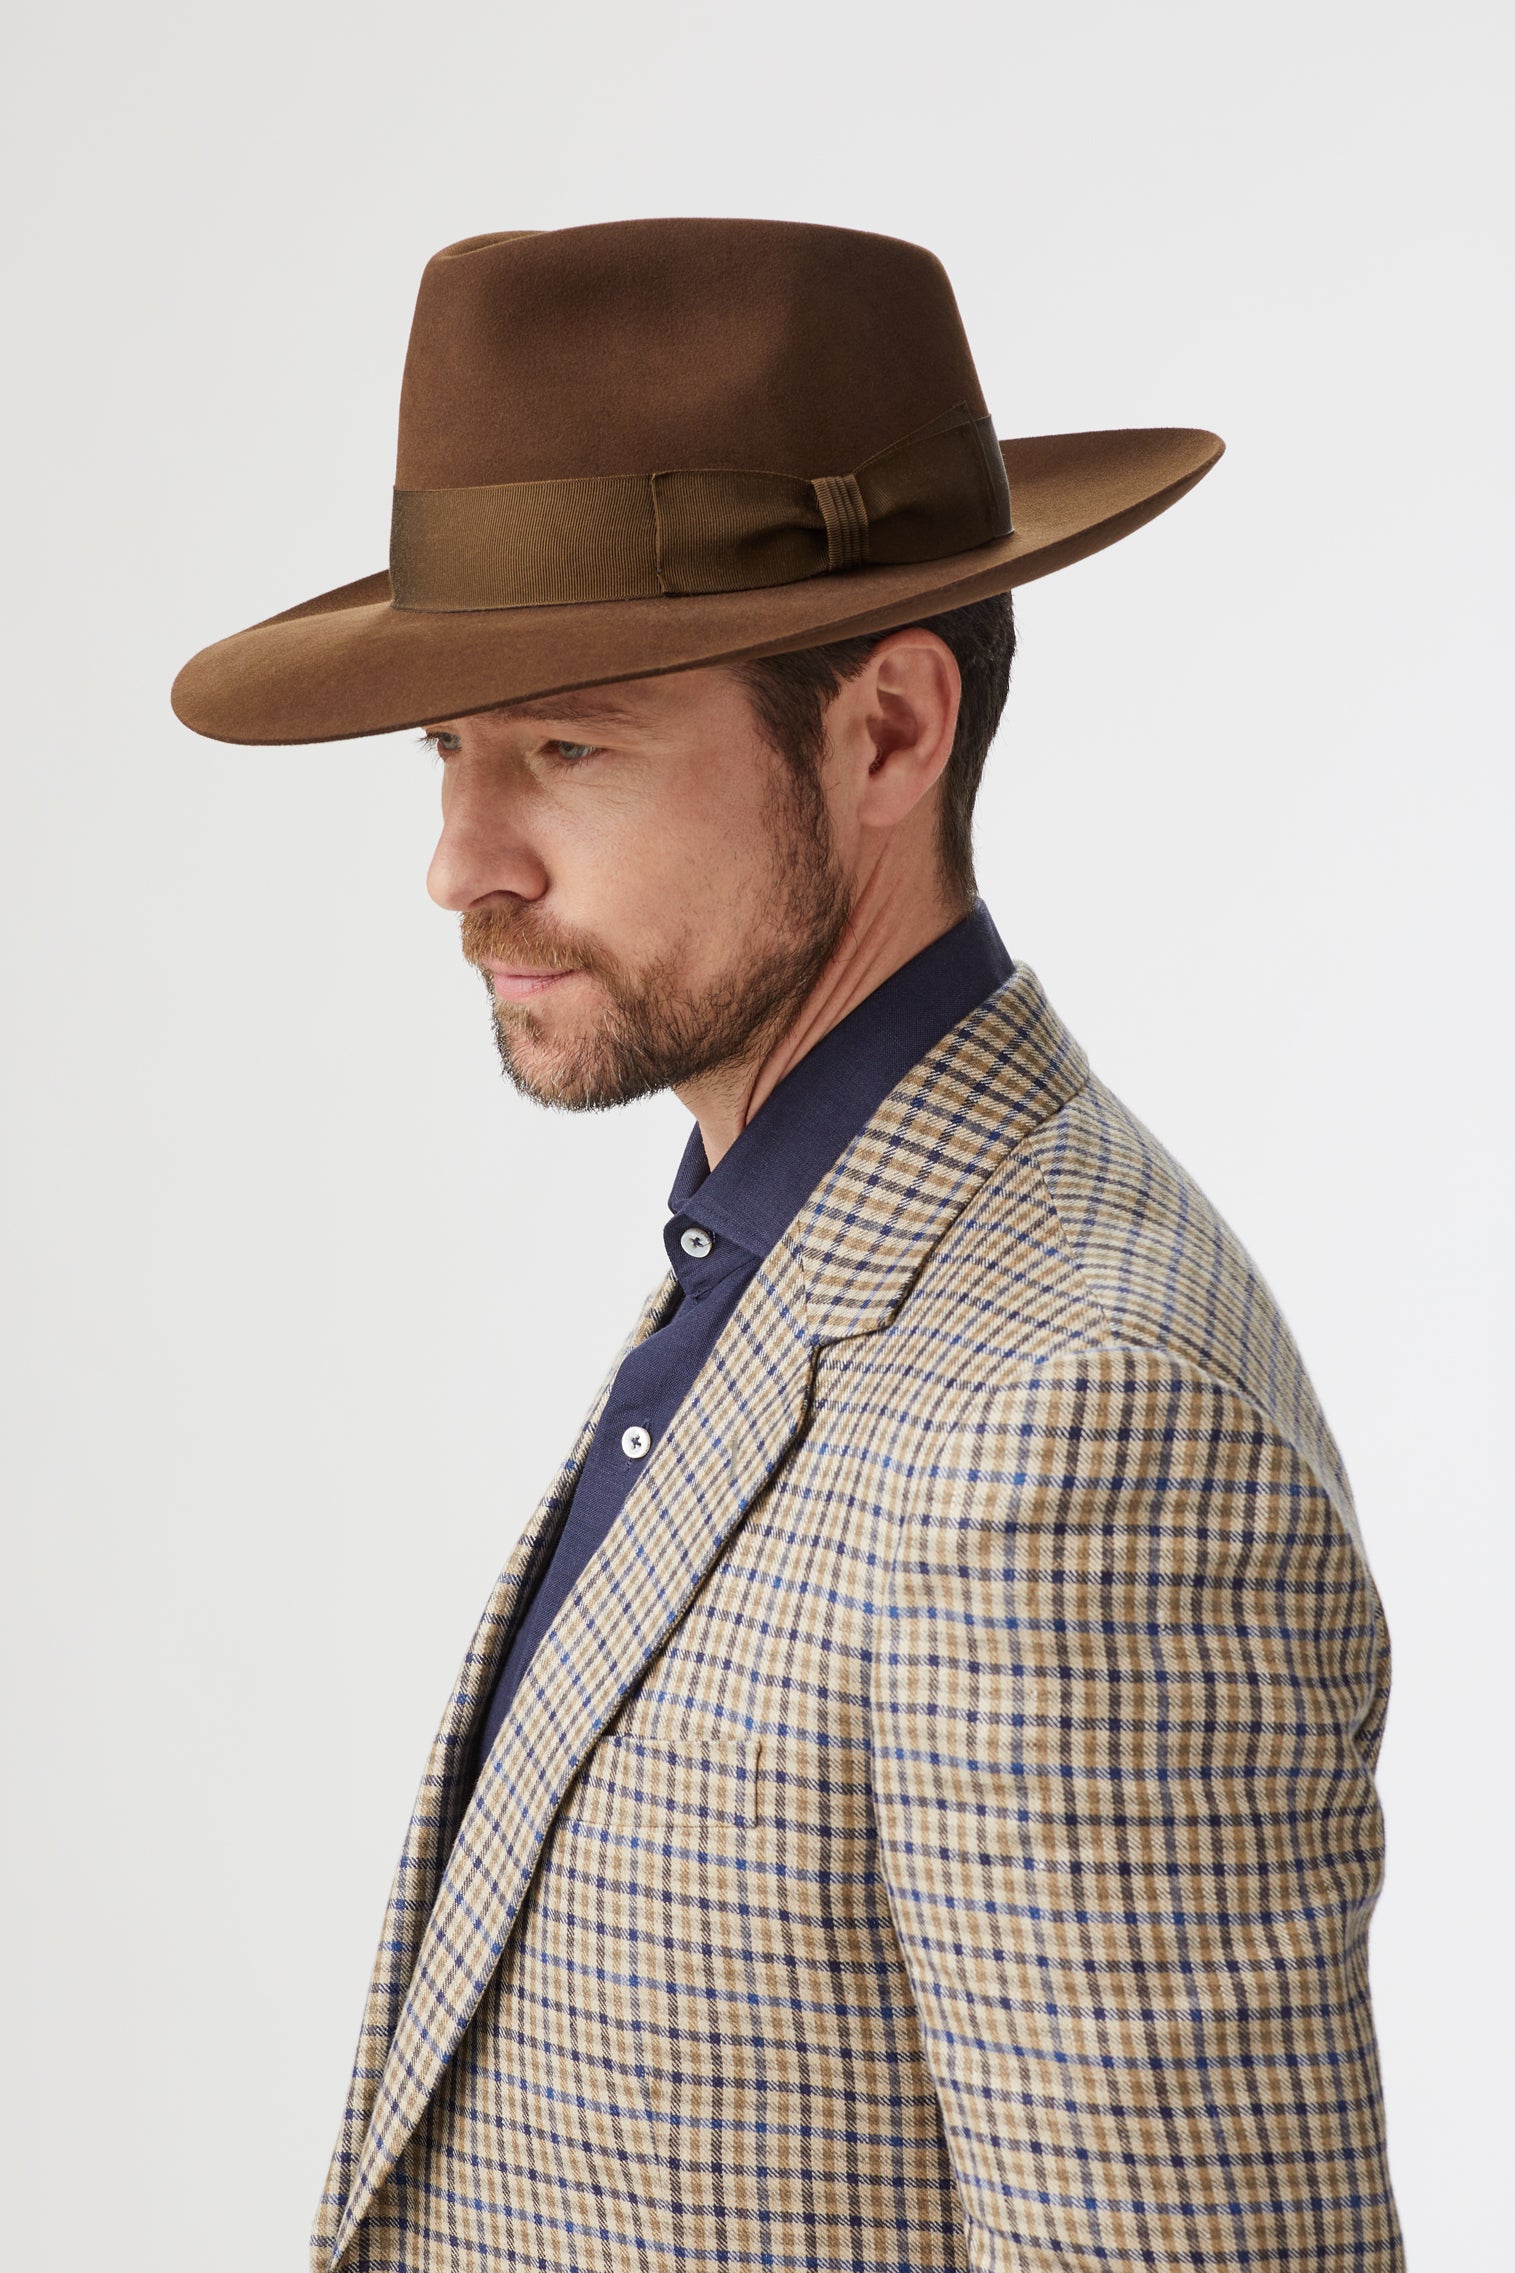 Escorial Wool Stafford Fedora - Hats for Square Face Shapes - Lock & Co. Hatters London UK